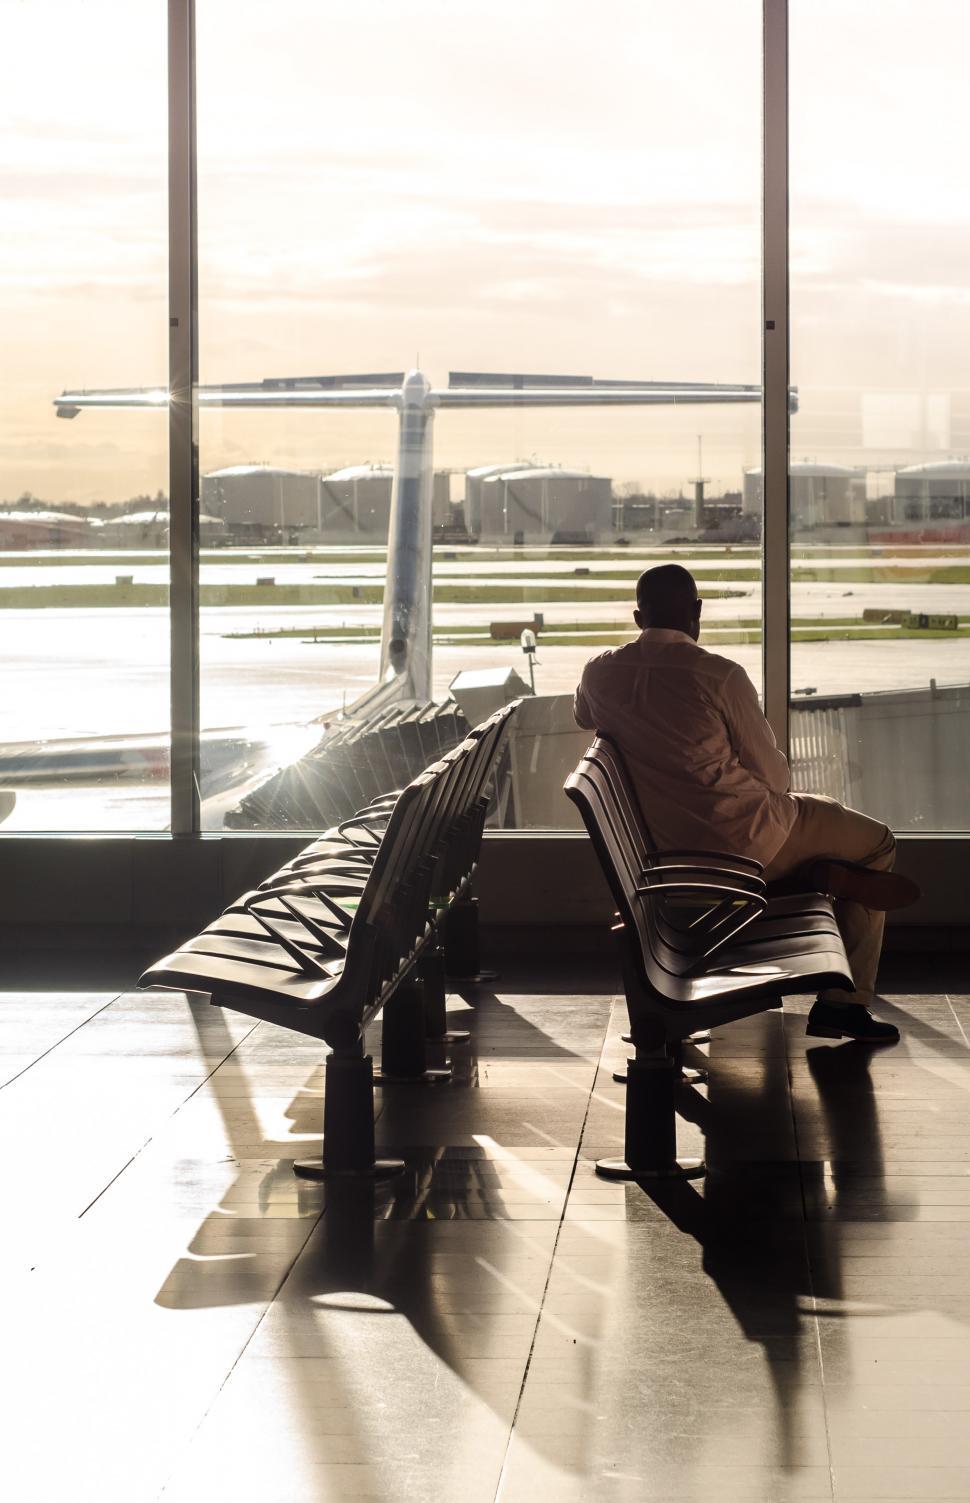 Free Image of Man Sitting on Bench Looking Out Airport Window 